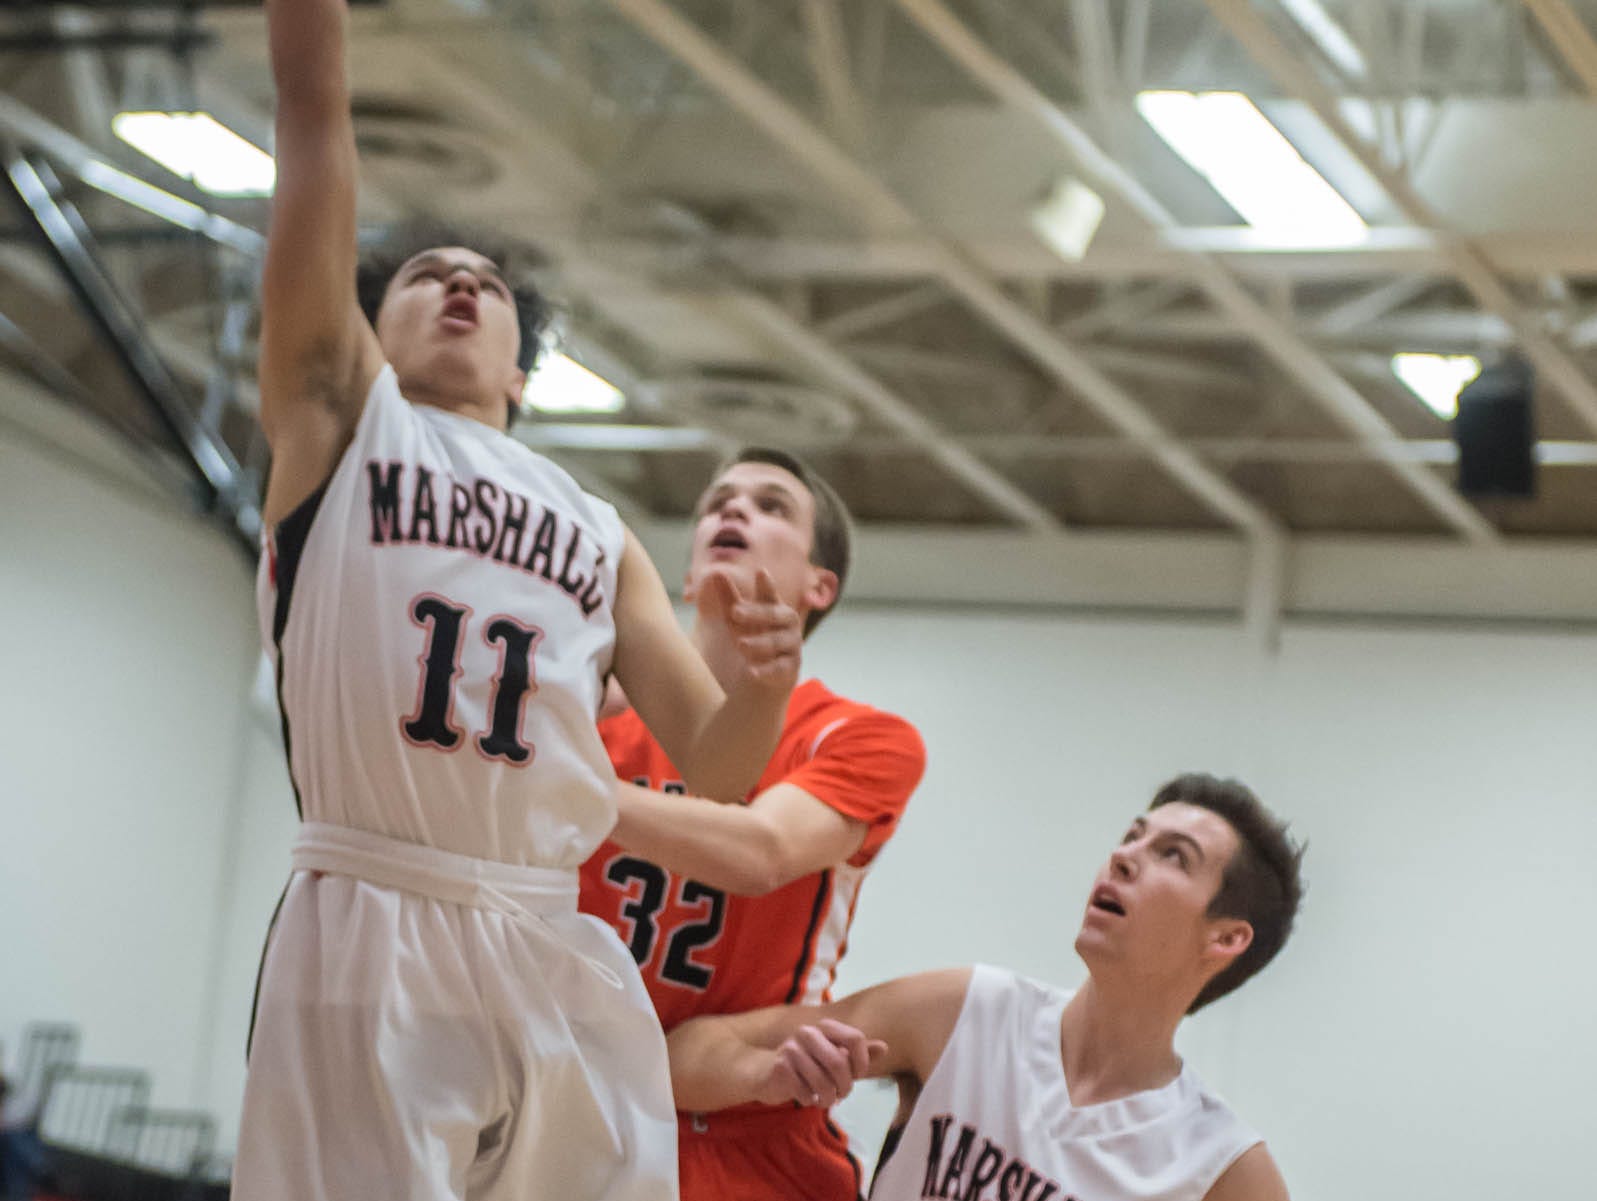 Marshall's Tyler Torrey goes for the hoop against Chatlotte in Tuesday evening's game.